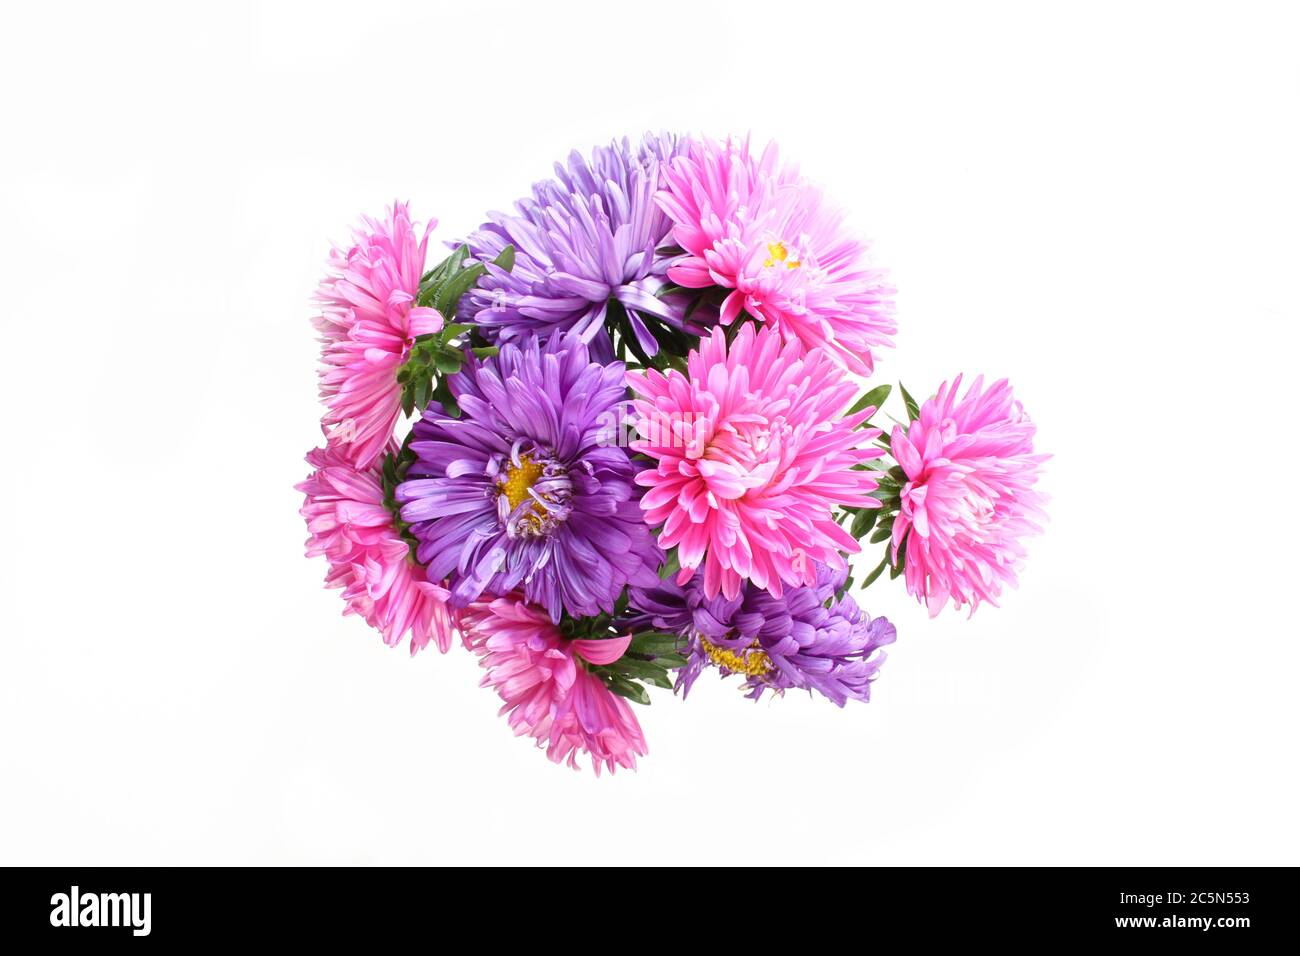 Callistephus chinensis. Pink and purple aster flowers bouquet isolated on white background. Top view Stock Photo